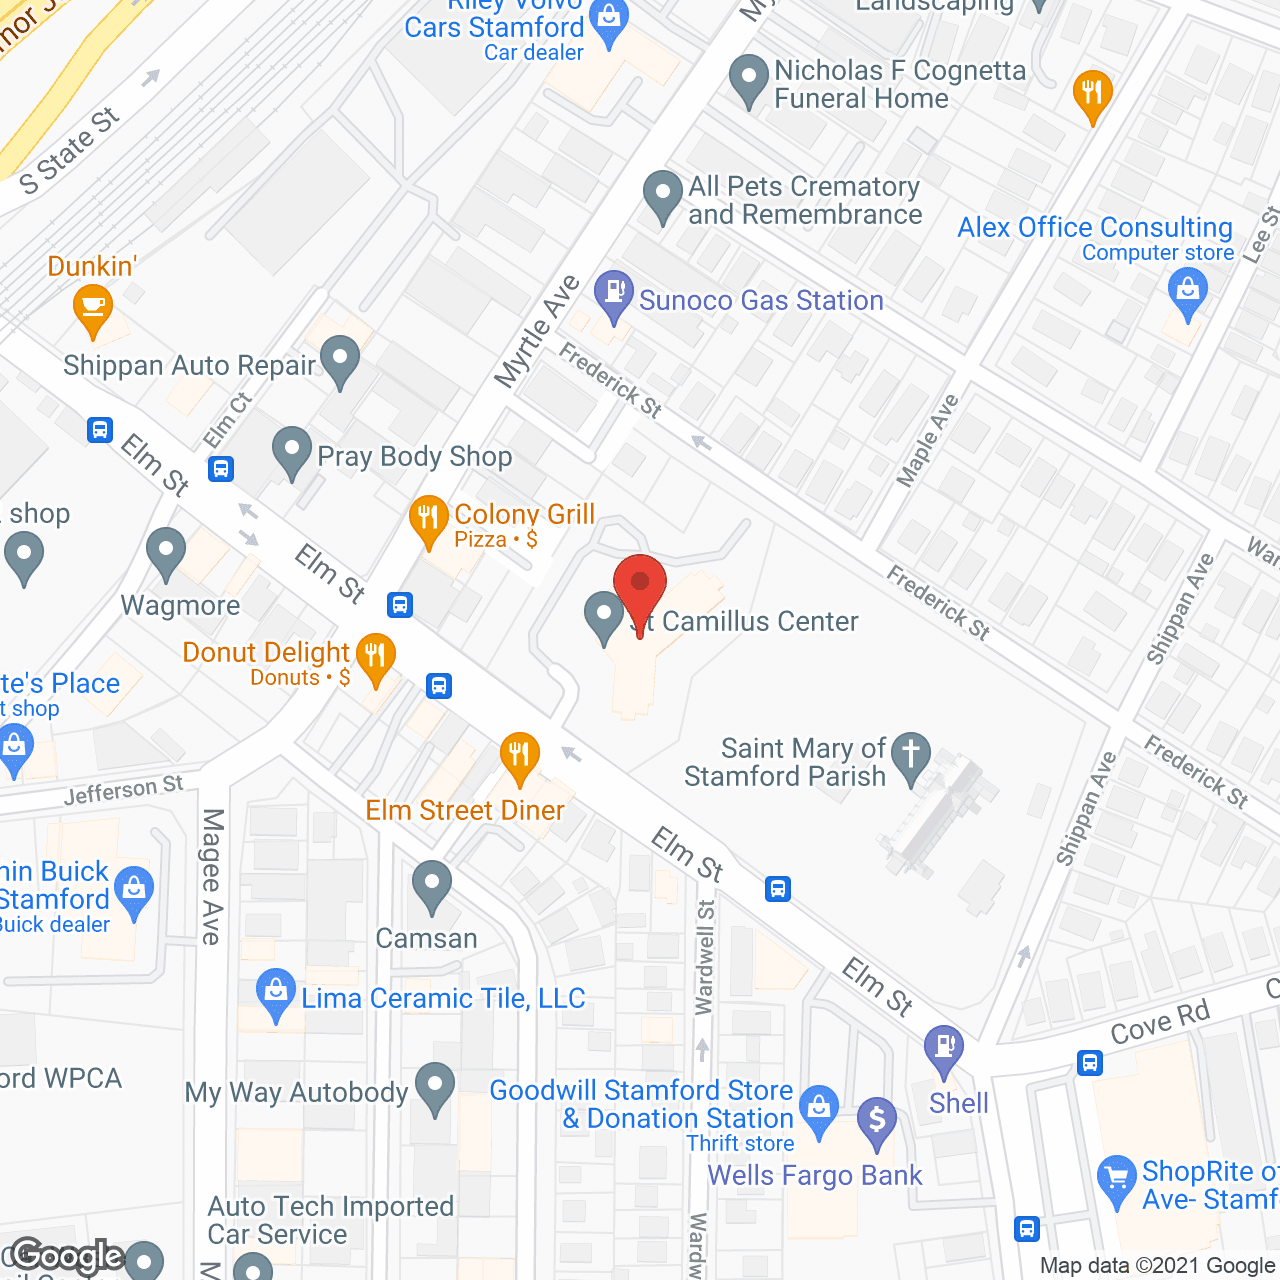 St Camillus Care and Rehabilitation Center in google map